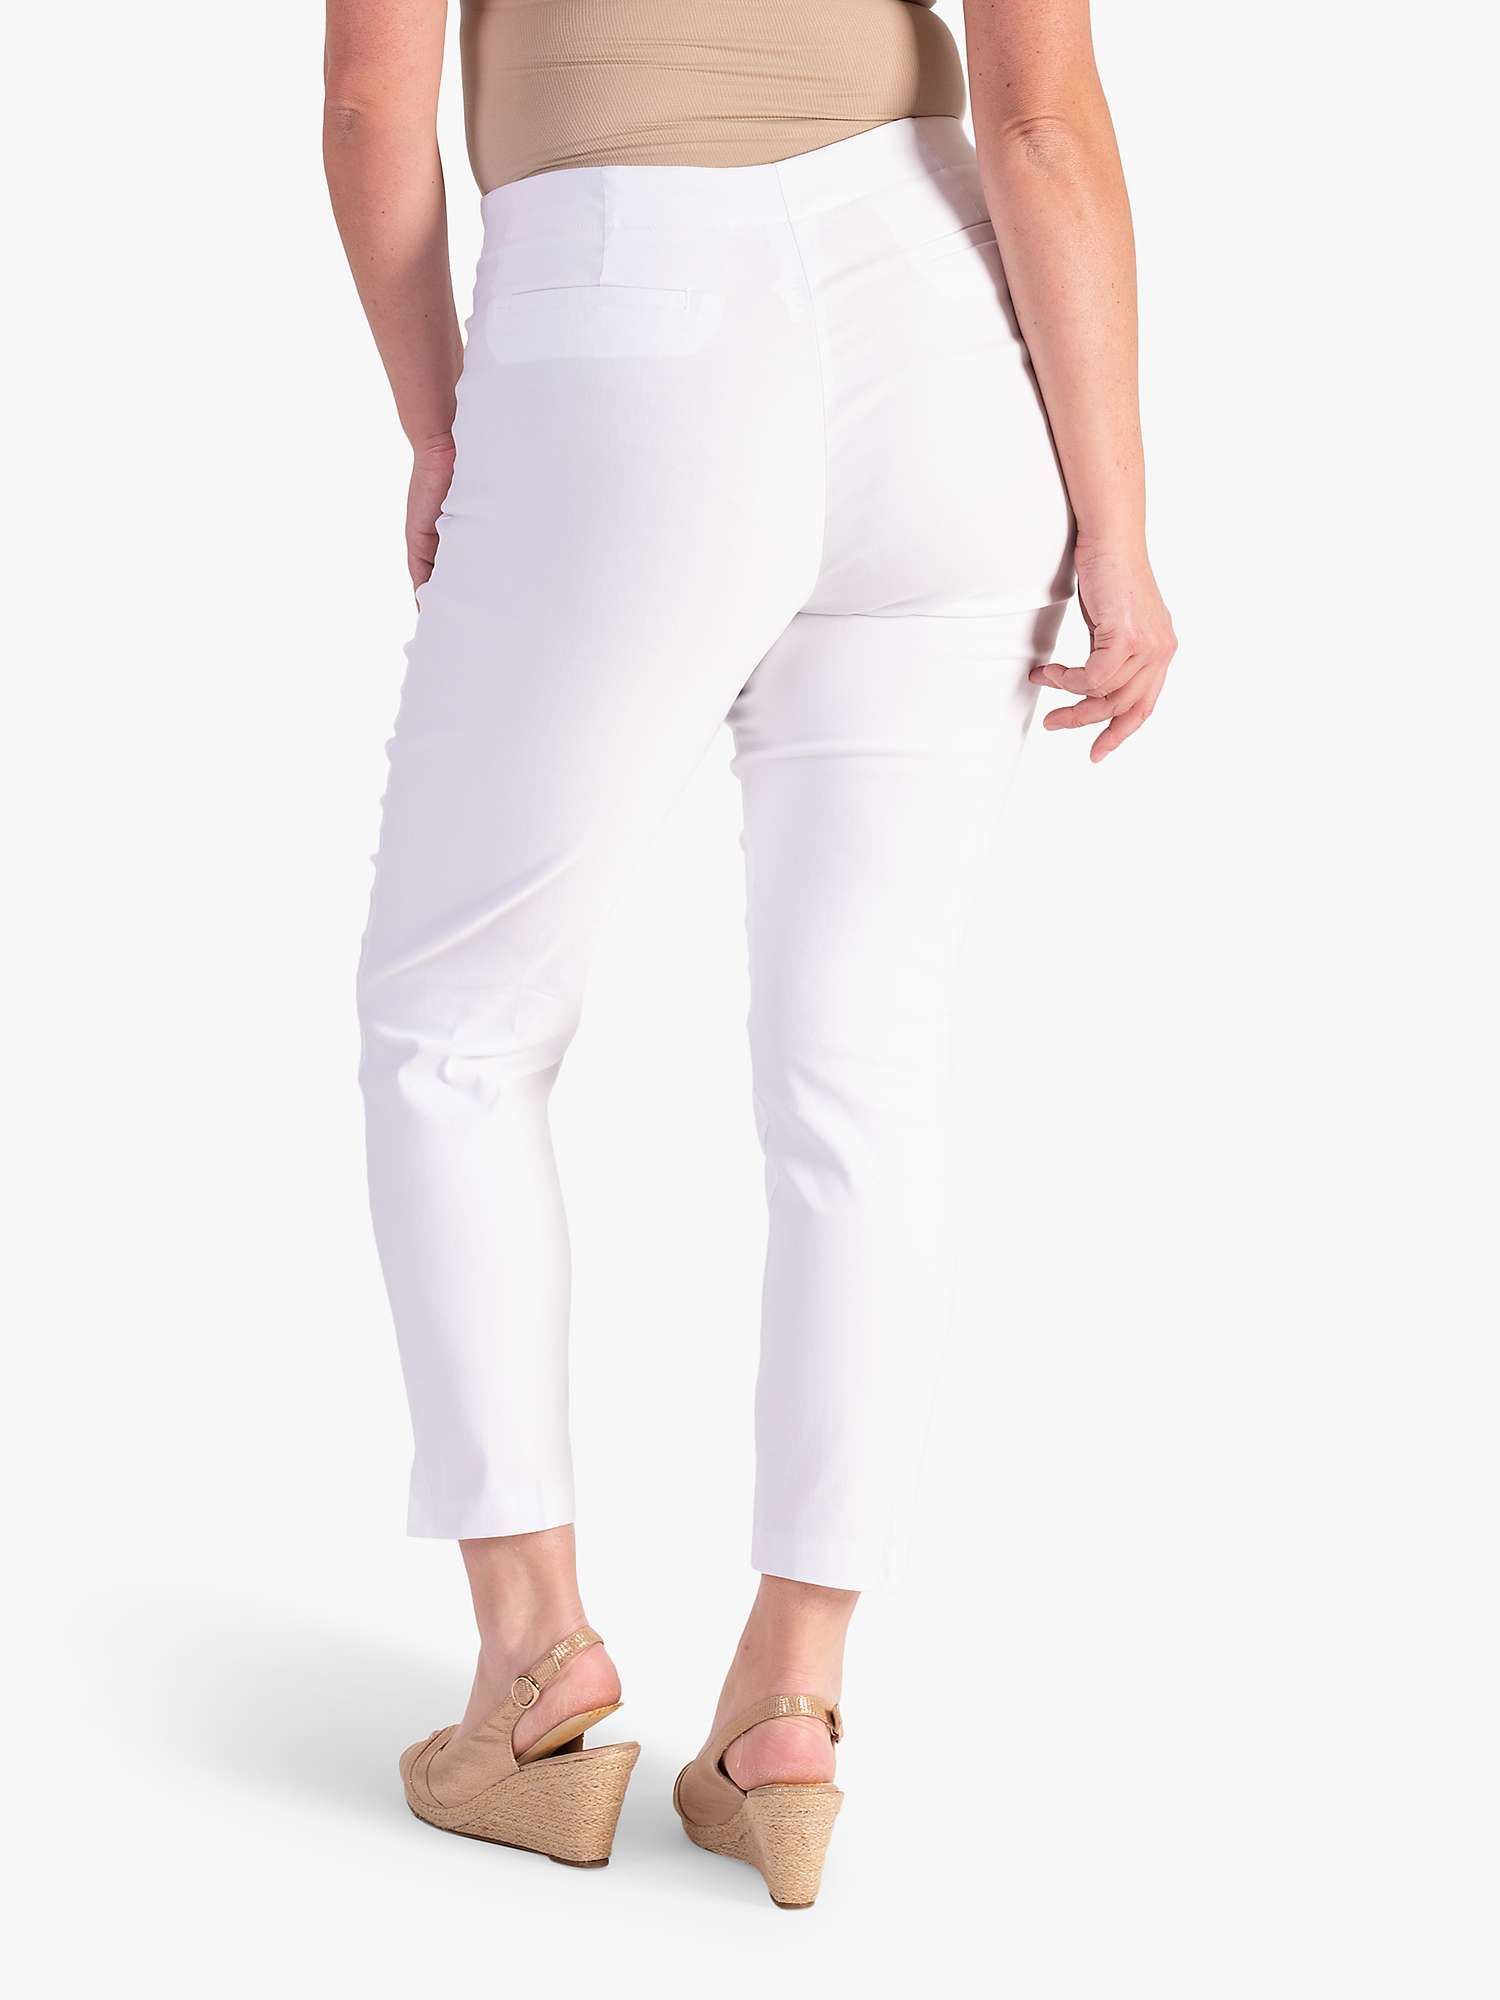 Buy chesca Slim Leg Trousers Online at johnlewis.com